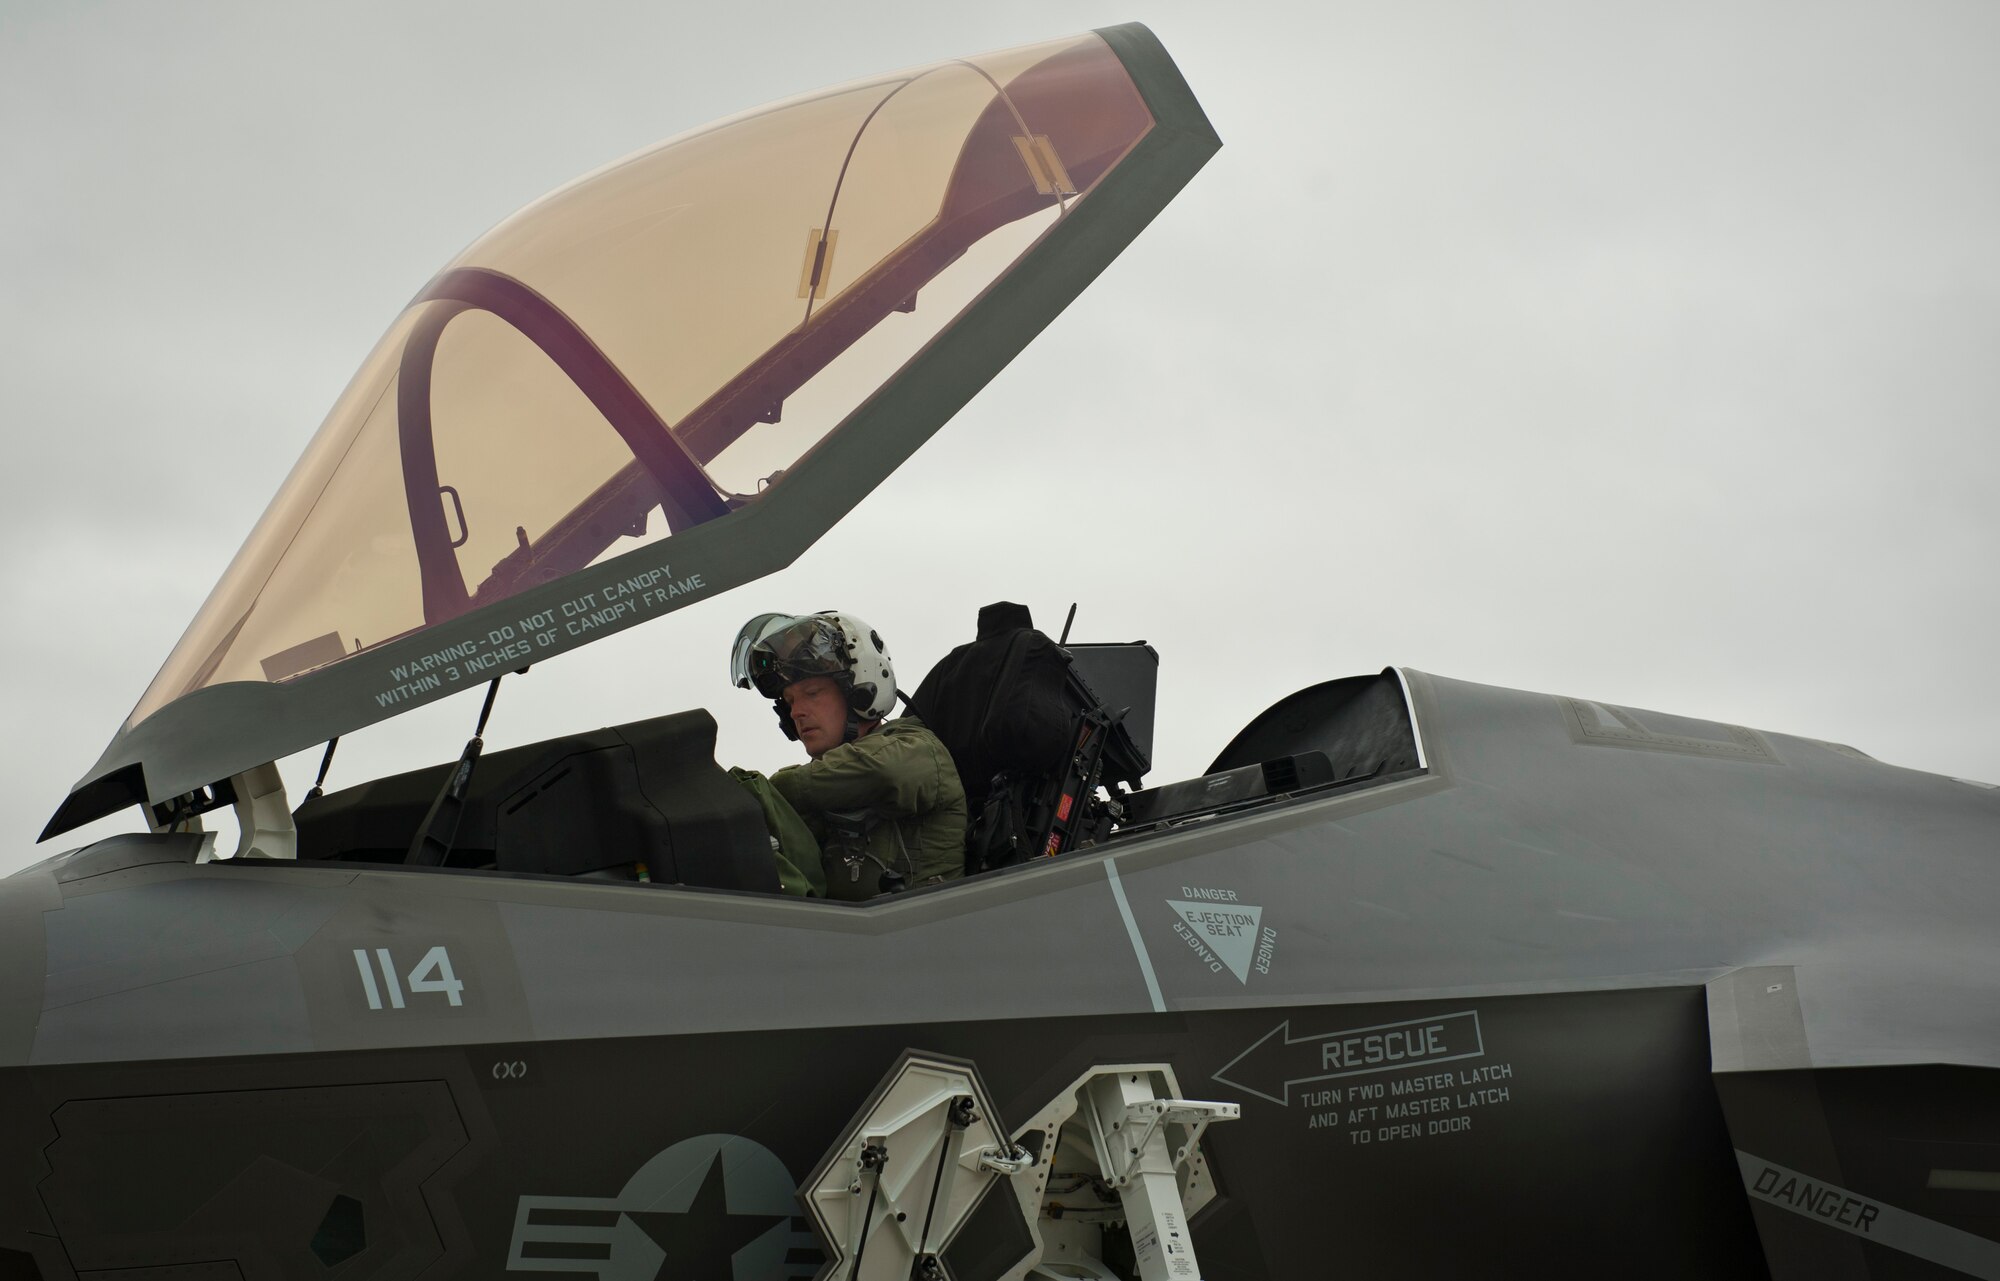 U.S. Marine Lt. Col. J.T. “Tank” Ryan, Marine Fighter Attack Training Squadron 501 detachment commander and F-35 pilot, delivers the first Marine Corps F-35C Lightning II carrier variant to Navy Attack Fighter Squadron 101 on Eglin Air Force Base, Fla., Jan. 13, 2015. Ryan flew the aircraft from the Lockheed Martin plant, Fort Worth, Texas, as the first of five Marine Corps F-35C model aircraft to be delivered to the VFA-101. The F-35C model brings 25% more range and a bigger weapons bay.  It also allows the Marine Corps to fly aboard Navy aircraft carriers, which continues an effective and long-standing tactical air integration program between the Navy and Marine Corps. (U.S. Air Force photo/Staff Sgt. Marleah Robertson)